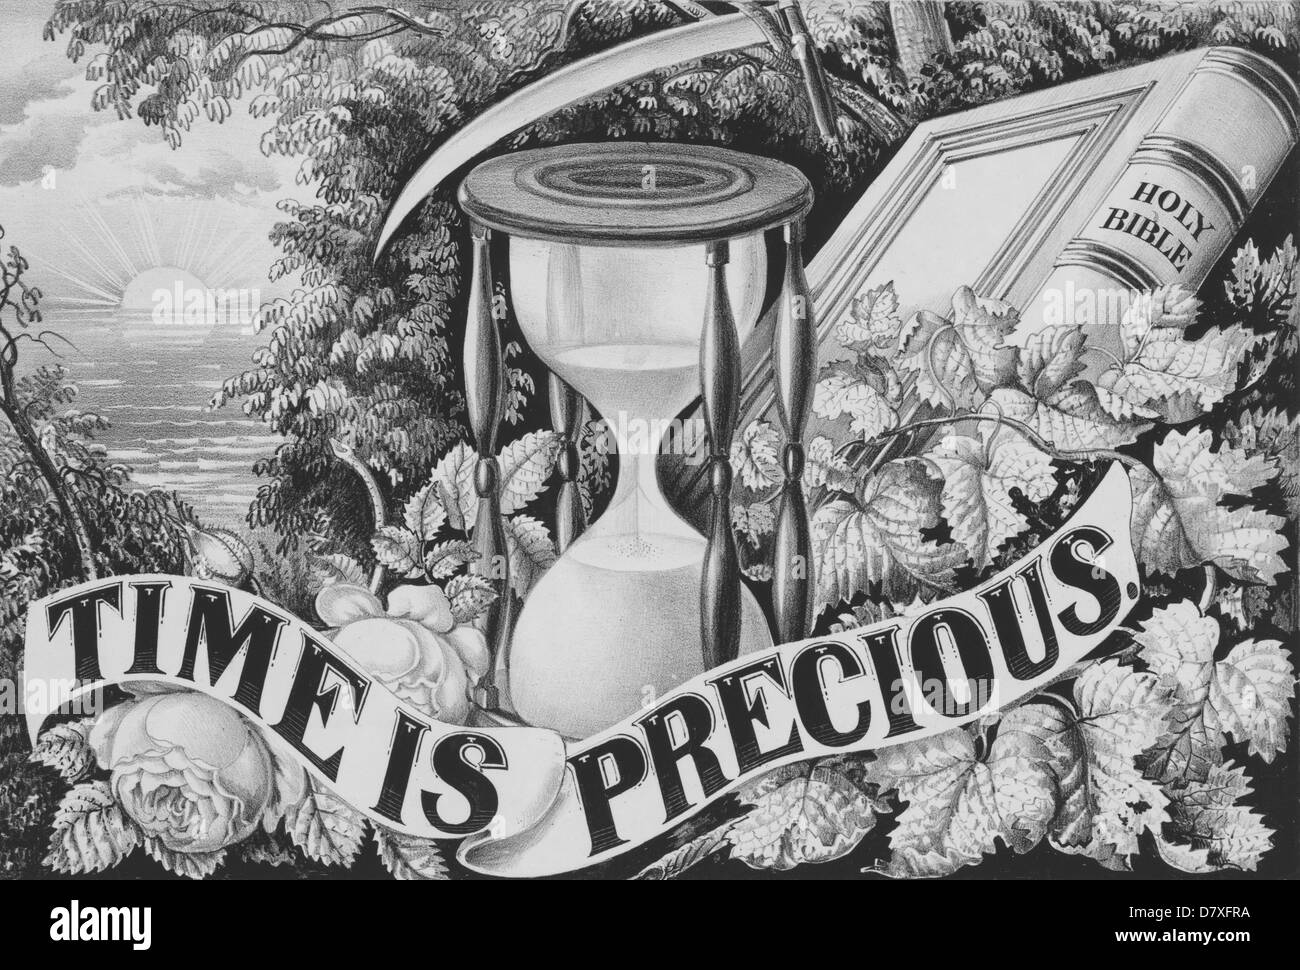 Time is precious - Illustration with Bible and hourglass with sun rising in the background Stock Photo